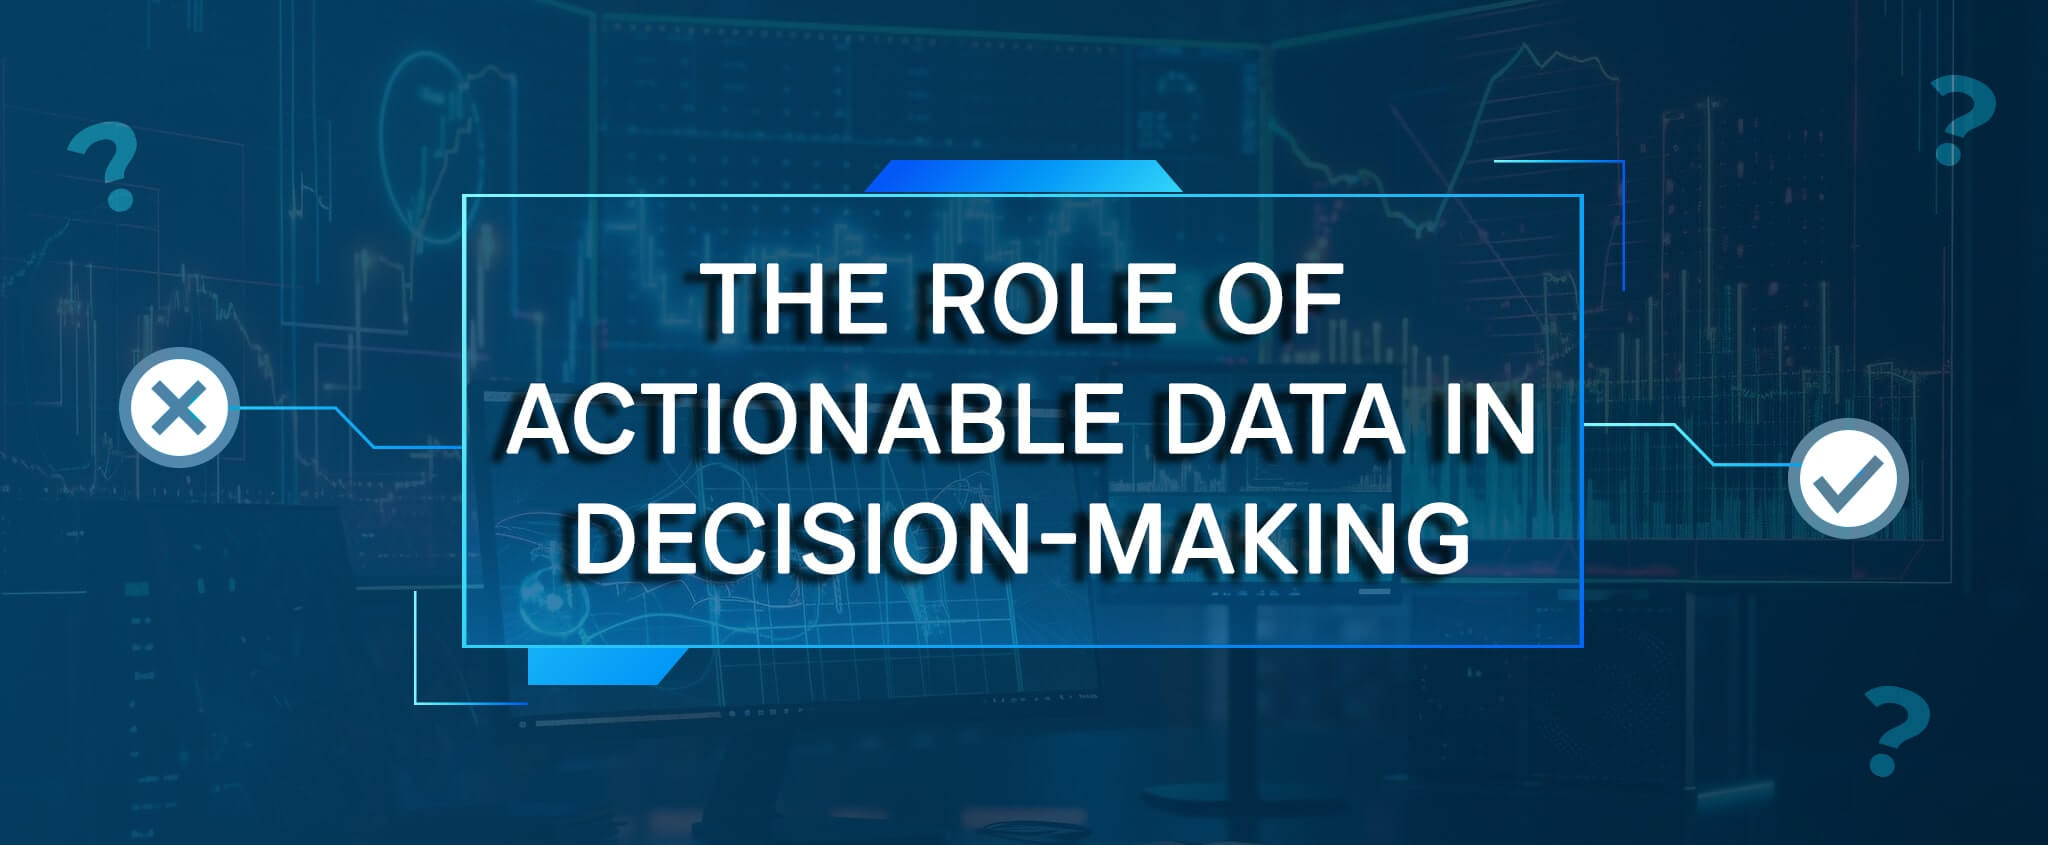 The Role of Actionable Data in Decision-Making